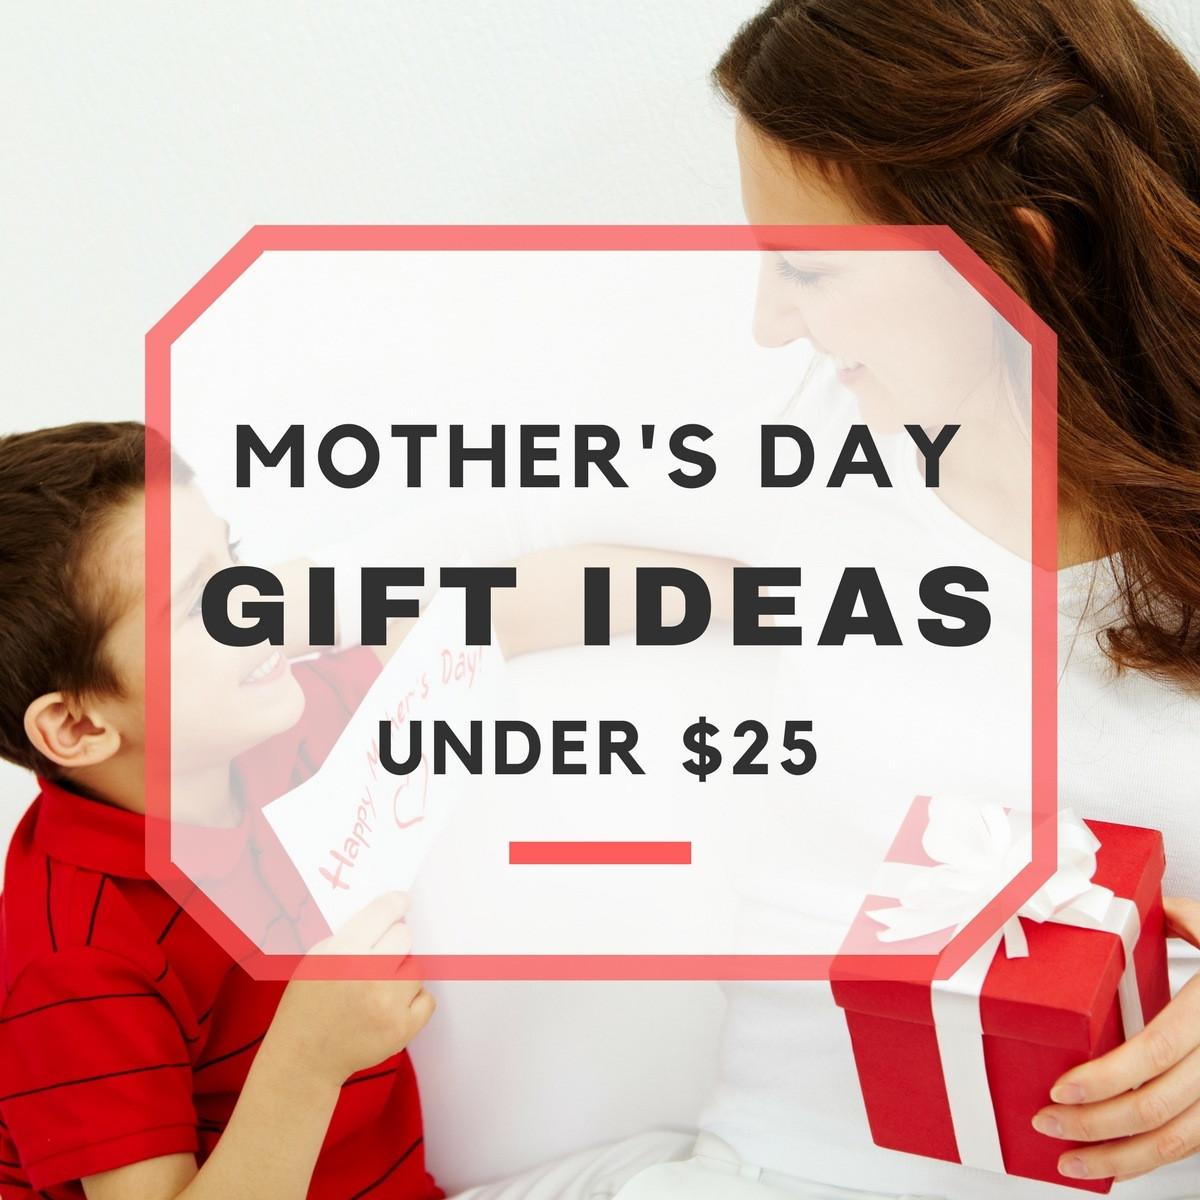 Great Mothers Day Gift Ideas
 10 Good Mother s Day Gift Ideas Under $25